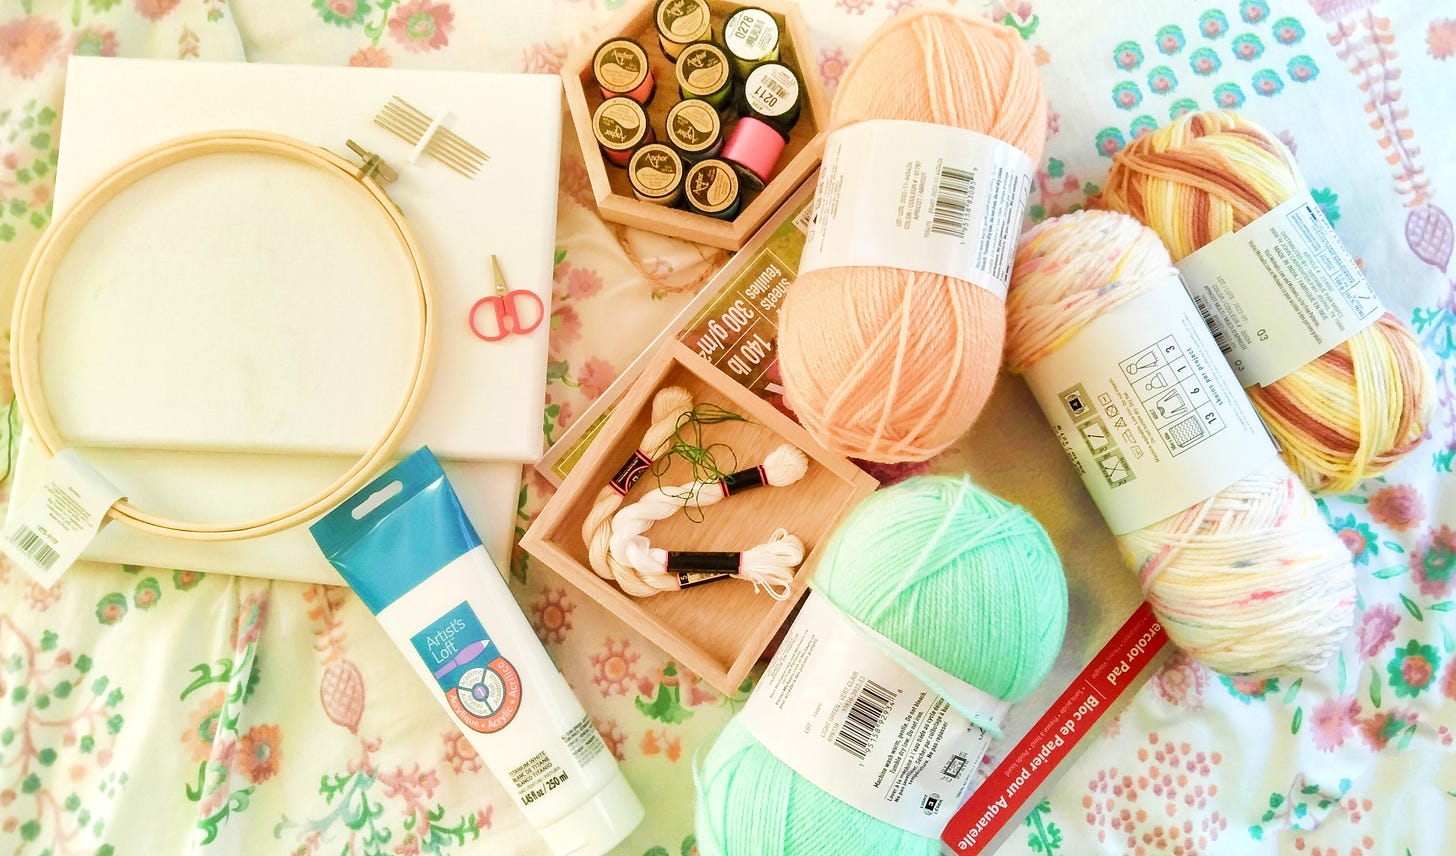 Art supplies: embrodery thread,hoop, crochet yarn, blank canvases, watercolor paper, needles, small scissors and frames